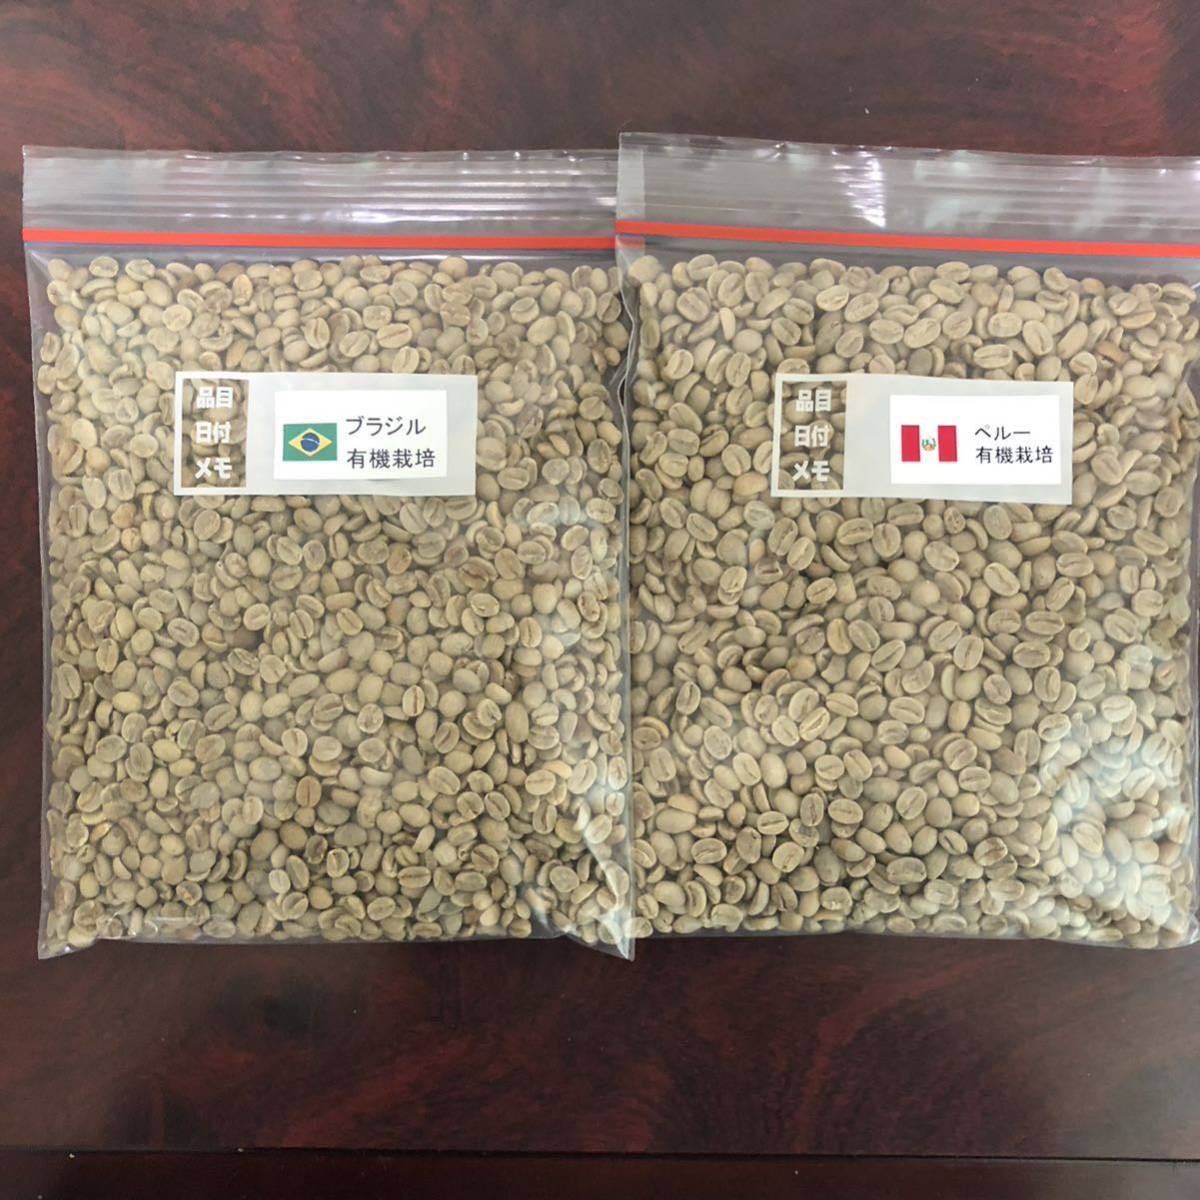  coffee raw legume have machine cultivation 2 kind Brazil *pe Roo each 400g